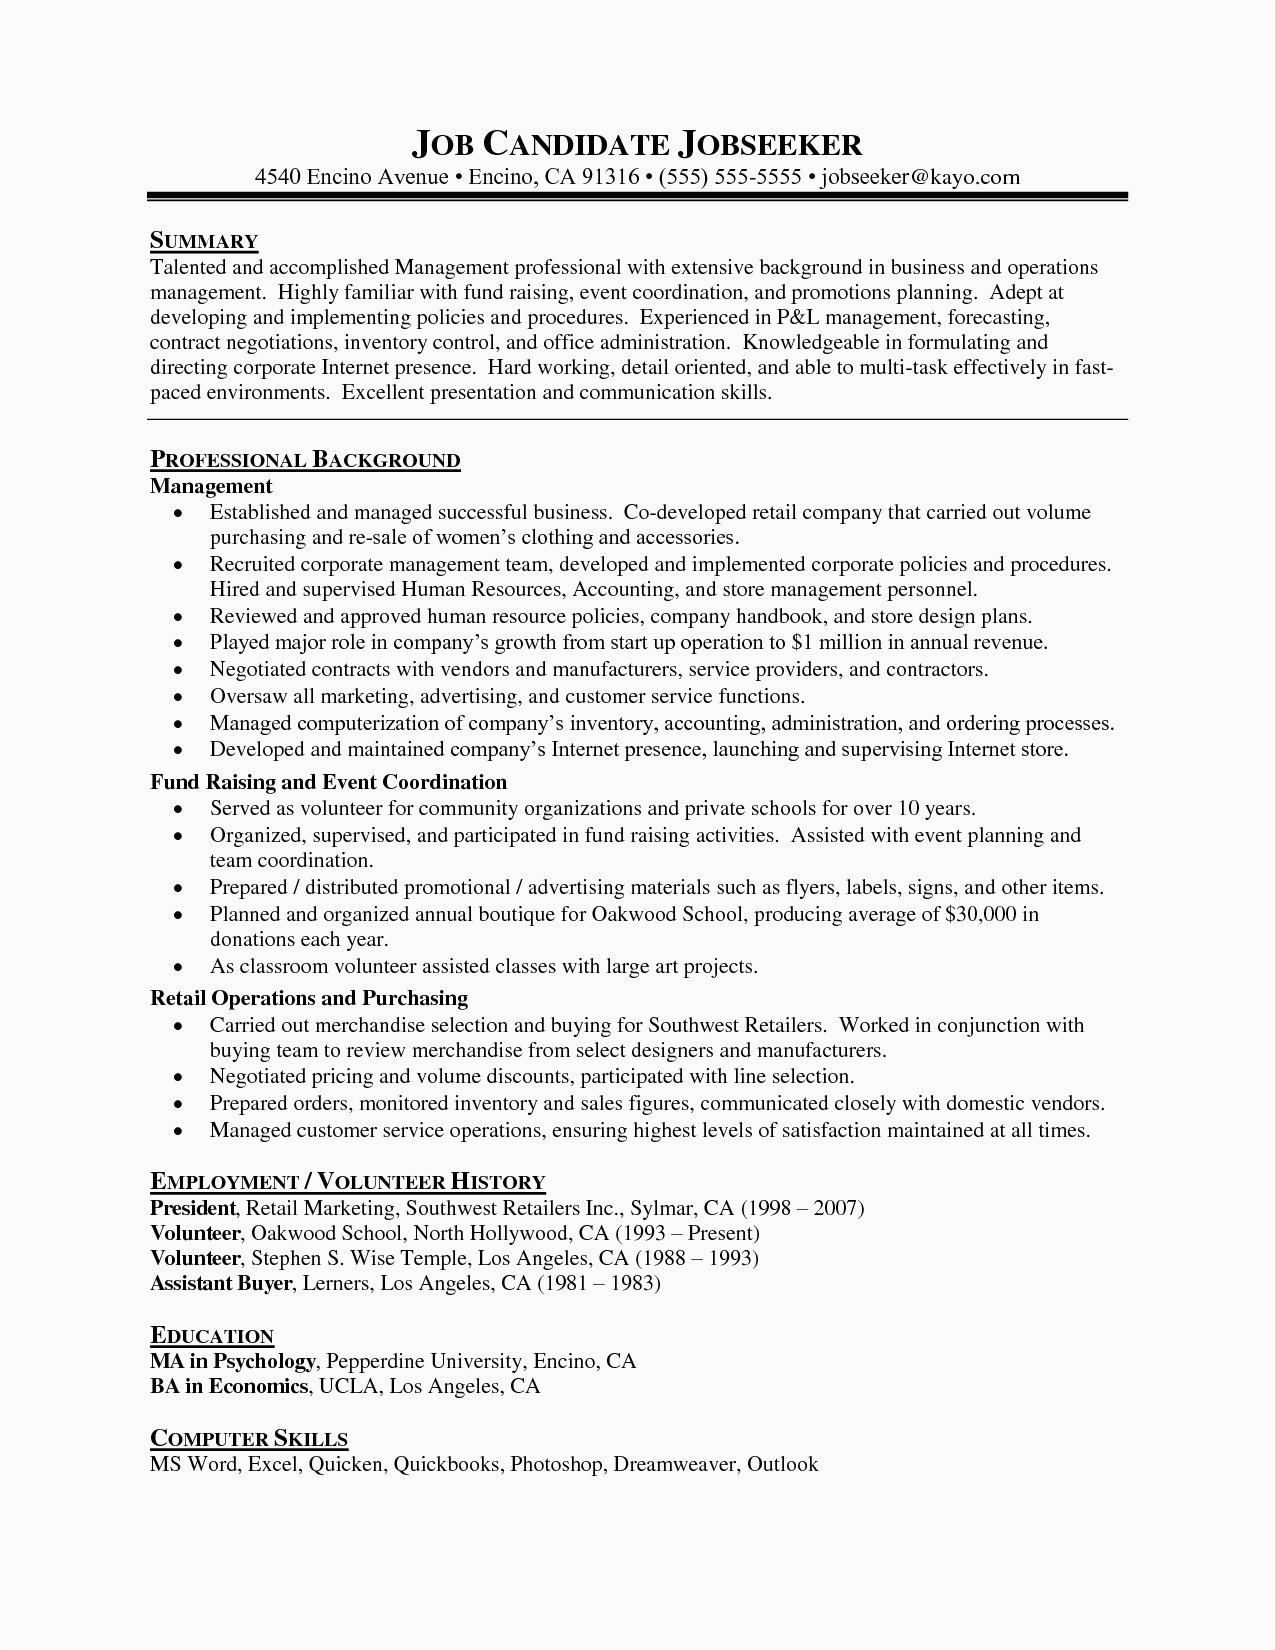 Resume Sample for Promotion within Same Company √ 20 Resume for Promotion within Same Pany ™